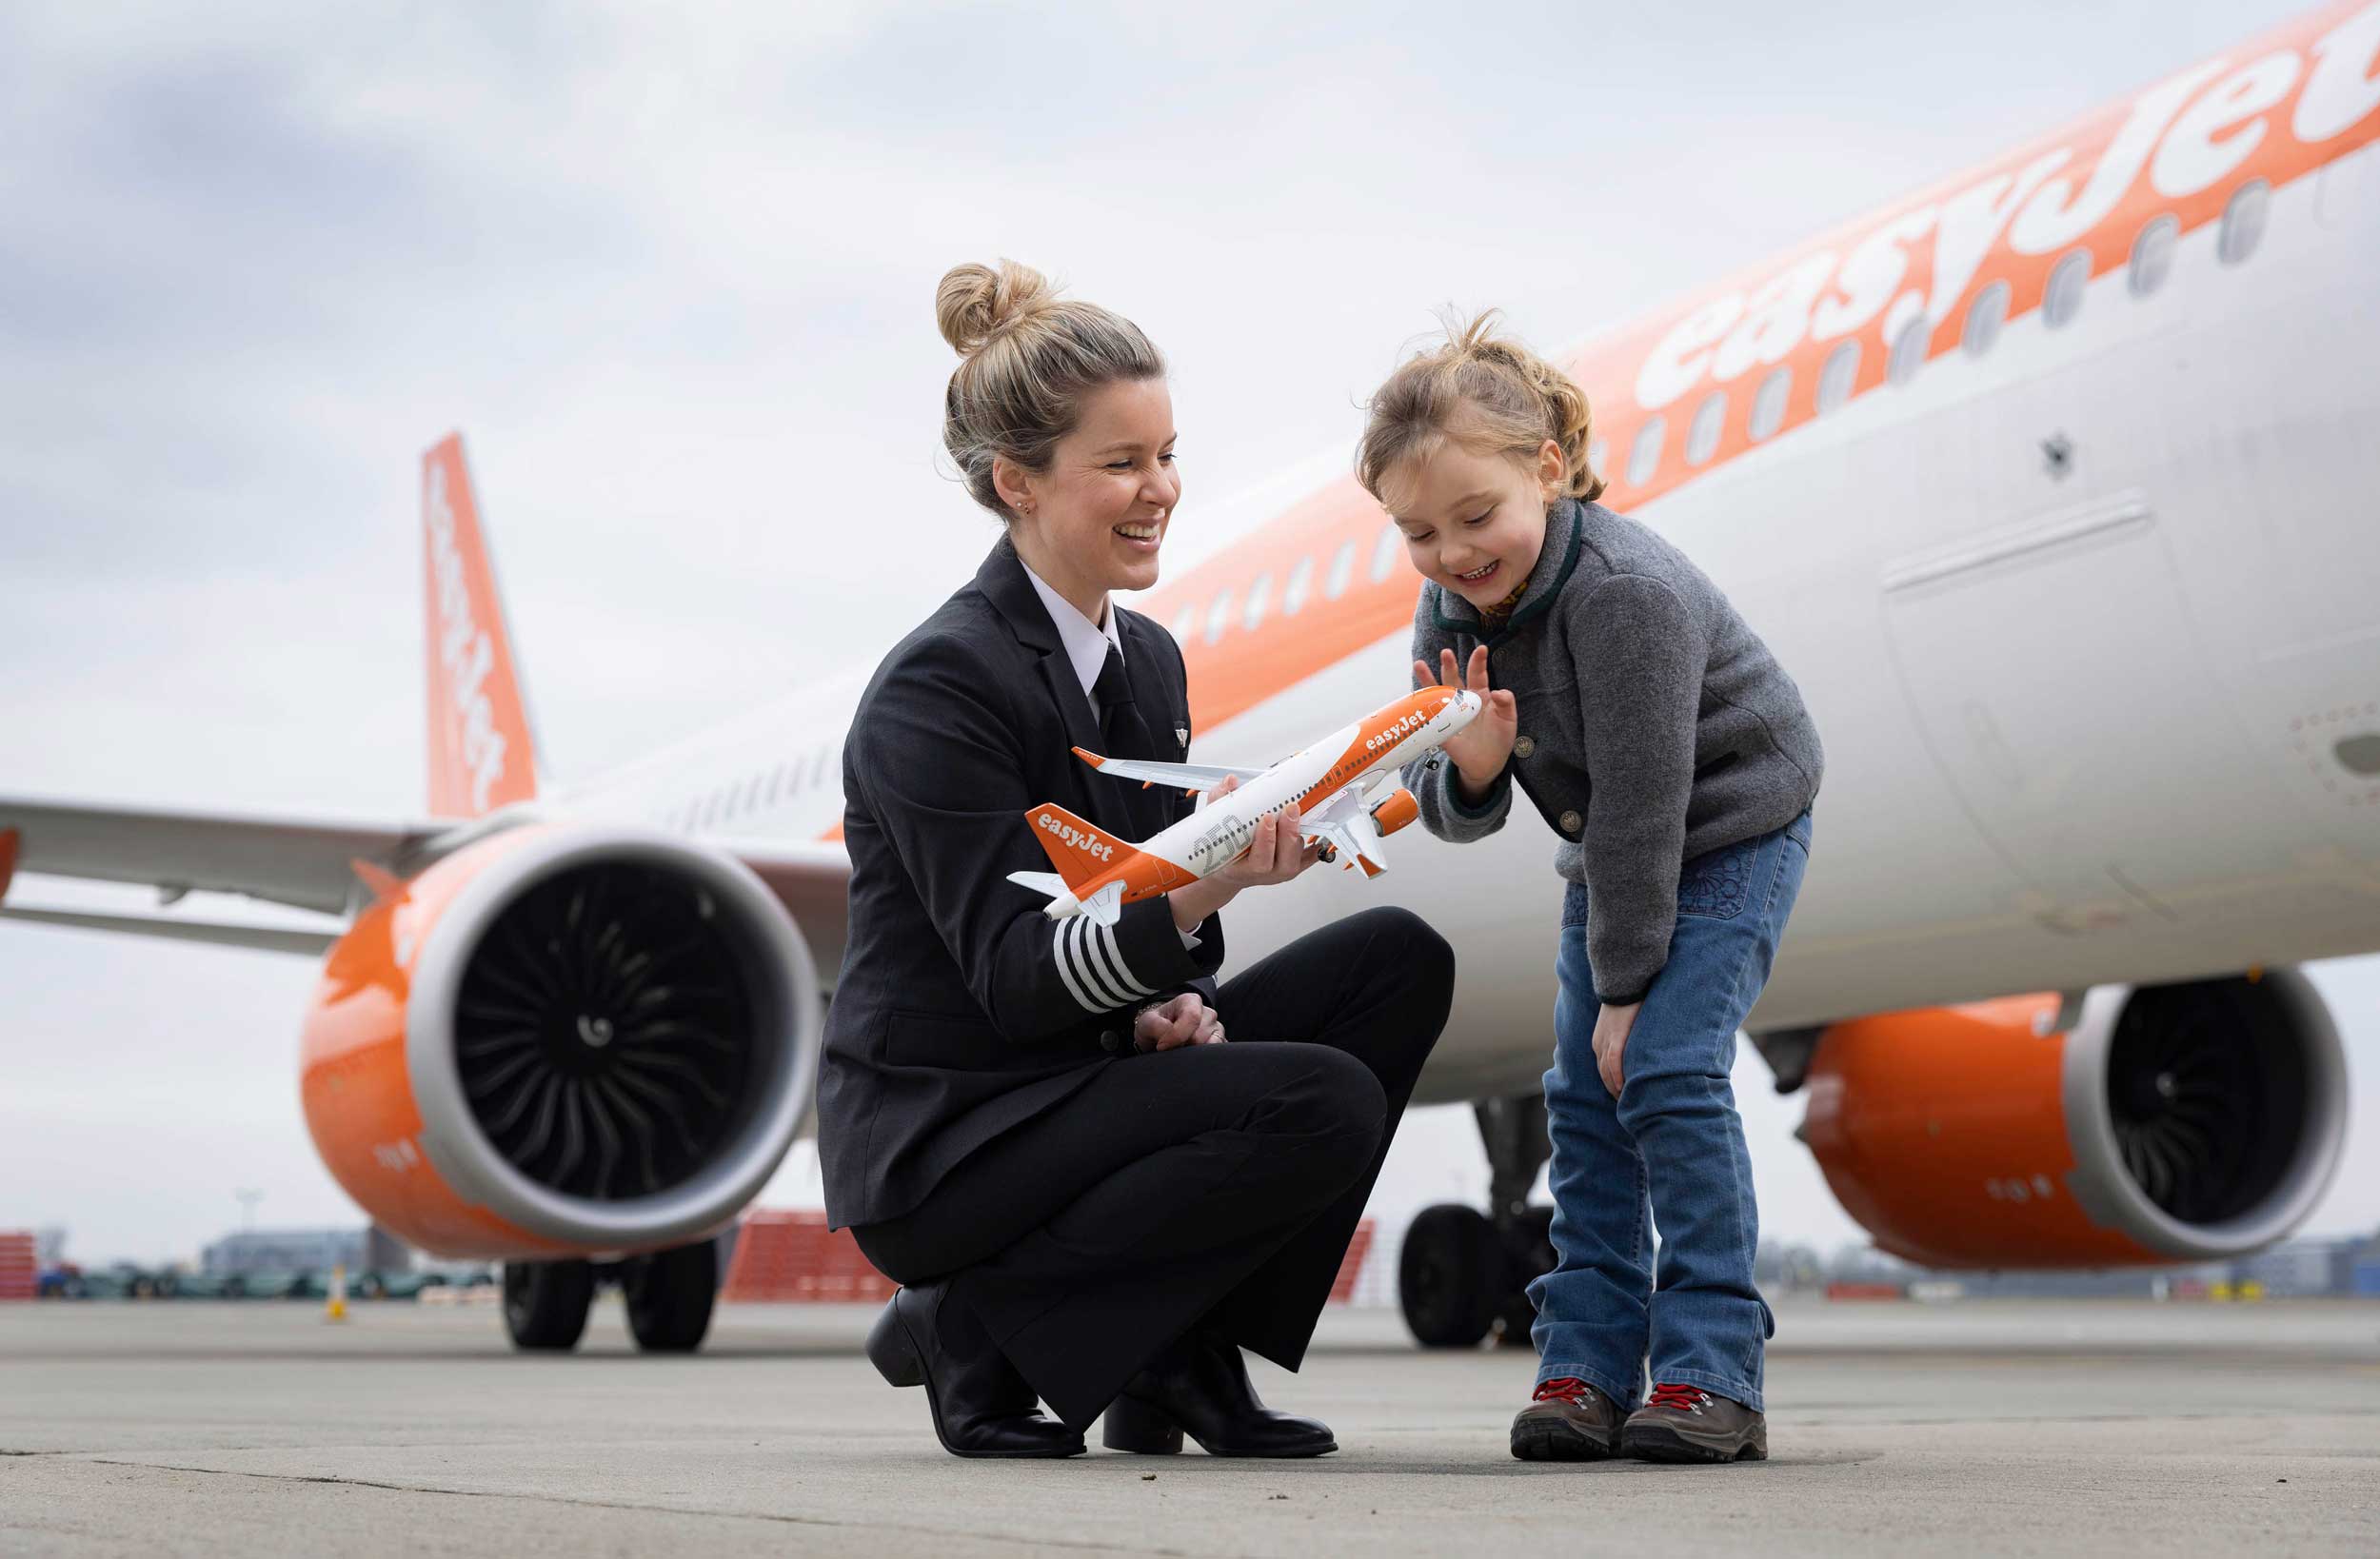 You are currently viewing easyJet launches recruitment drive for 1,000+ new pilots